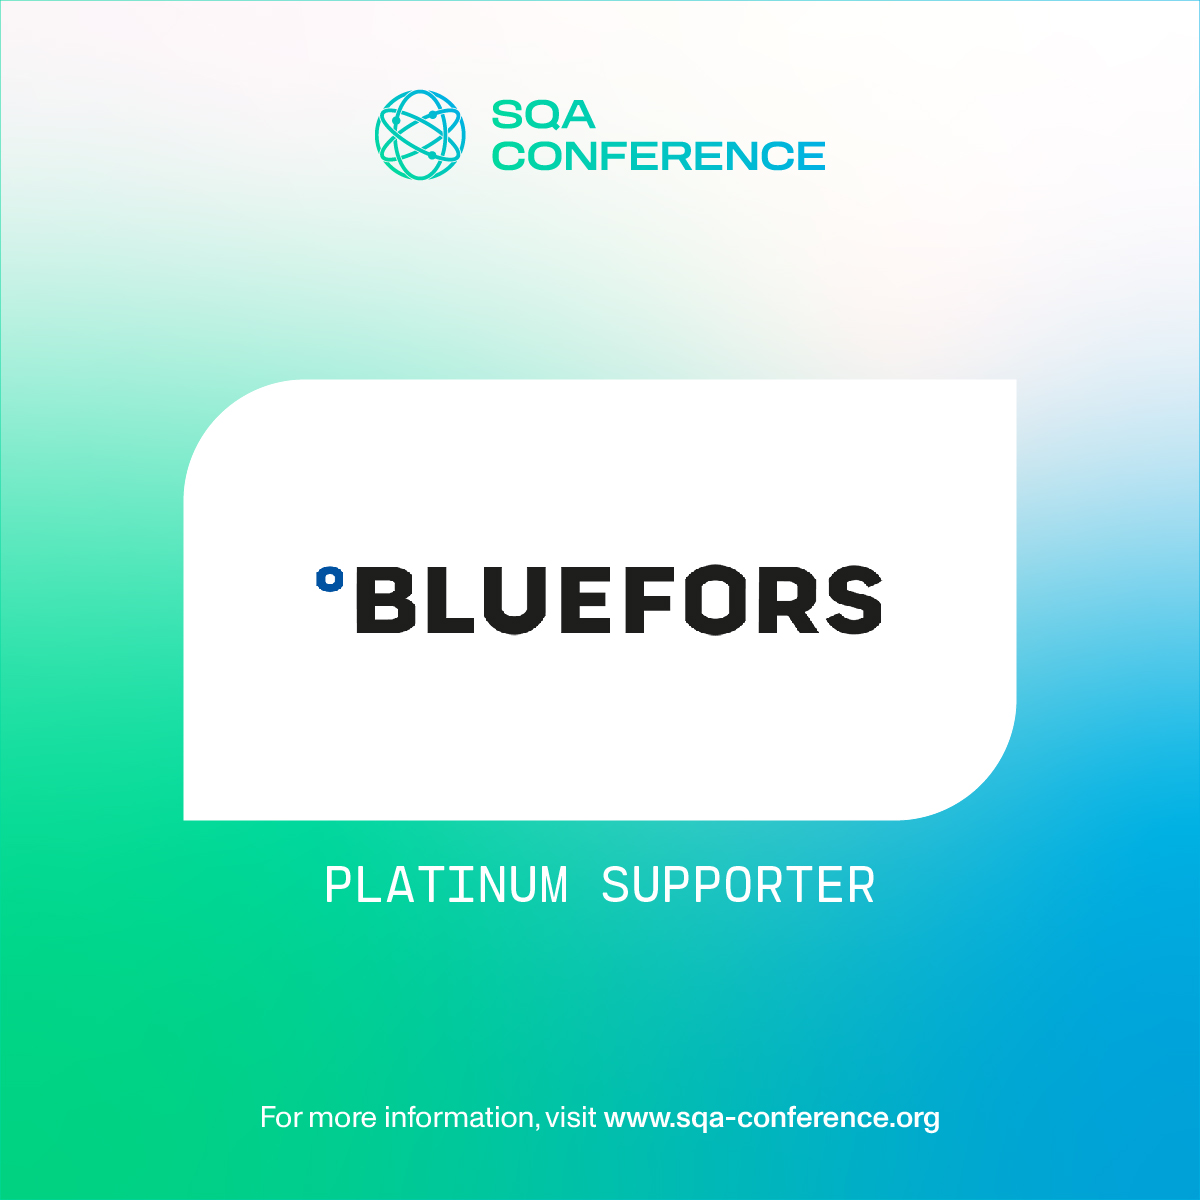 We're thrilled to announce that @BlueFors_Ltd is an official Platinum Supporter of the SQA Conference, which will be held in Helsinki, Finland!

Learn more about Bluefors here: https://t.co/cYMJAWcJ2q

#SQAConf2022 #SQAConference #cooledbybluefors https://t.co/aIzUj1jsM2